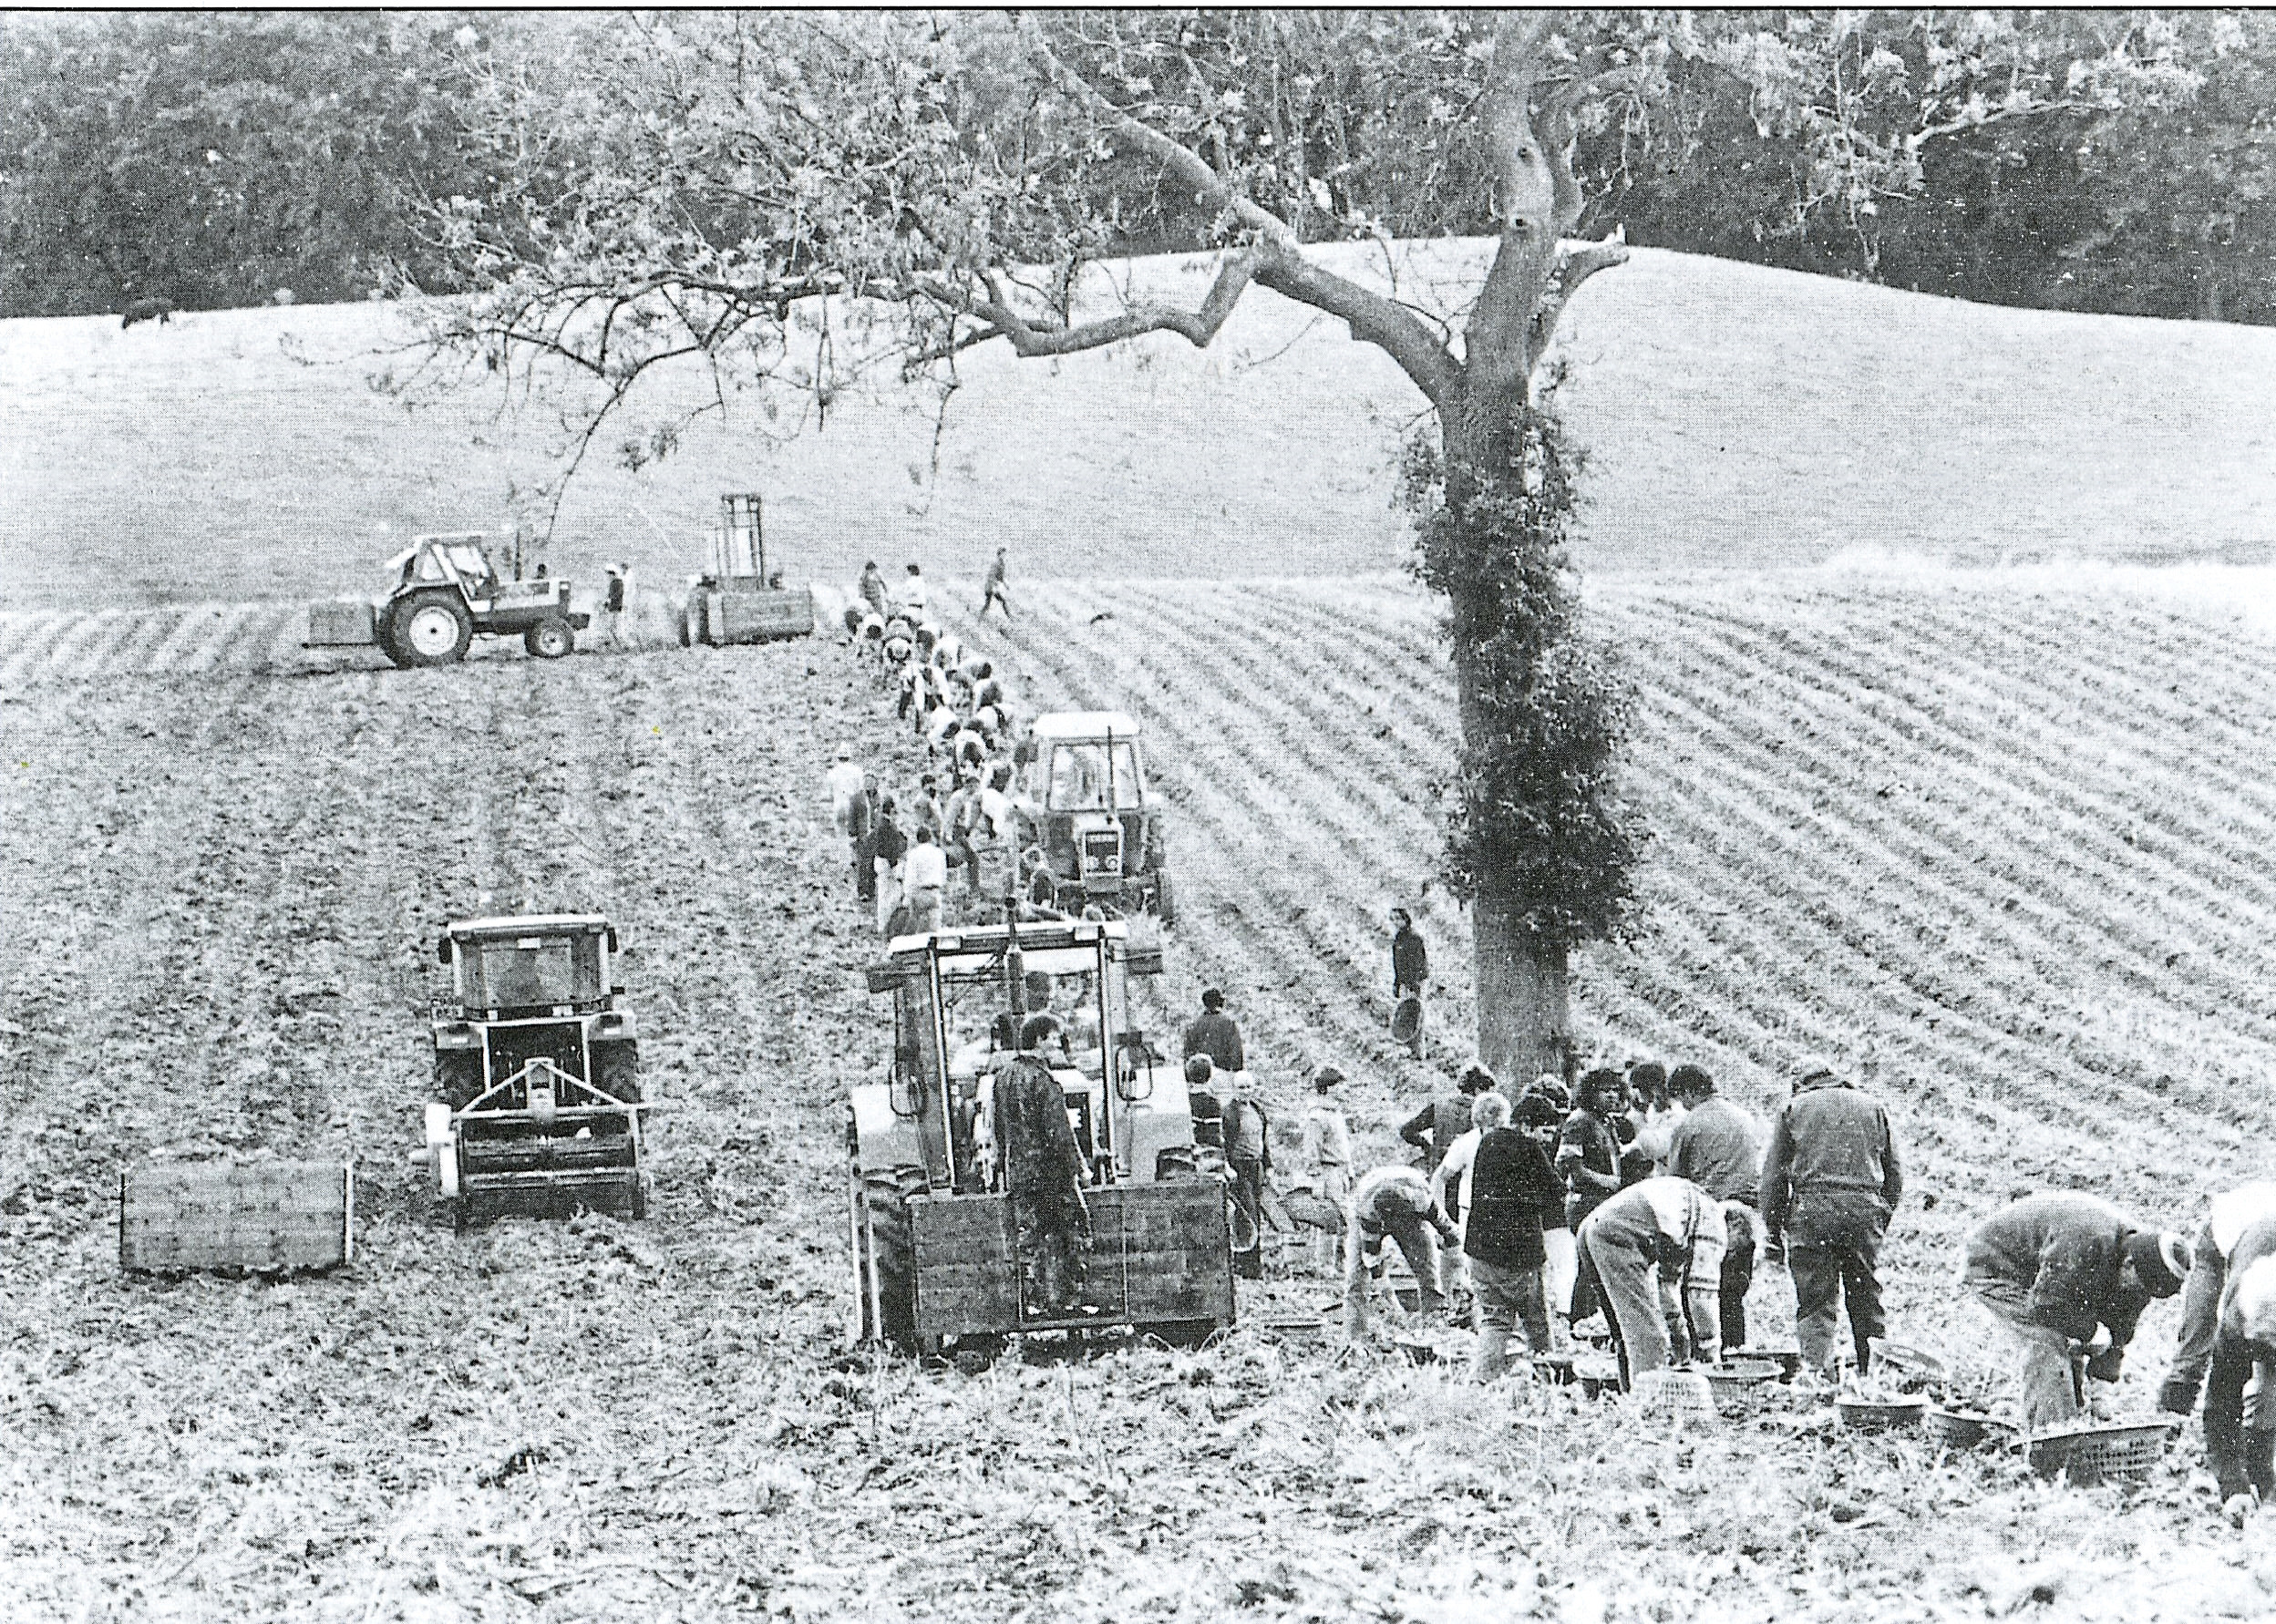 A large squad lifting potatoes in Fife probably in the early 1980s. By this time two row elevator diggers were used with two people picking side by side in each bit.